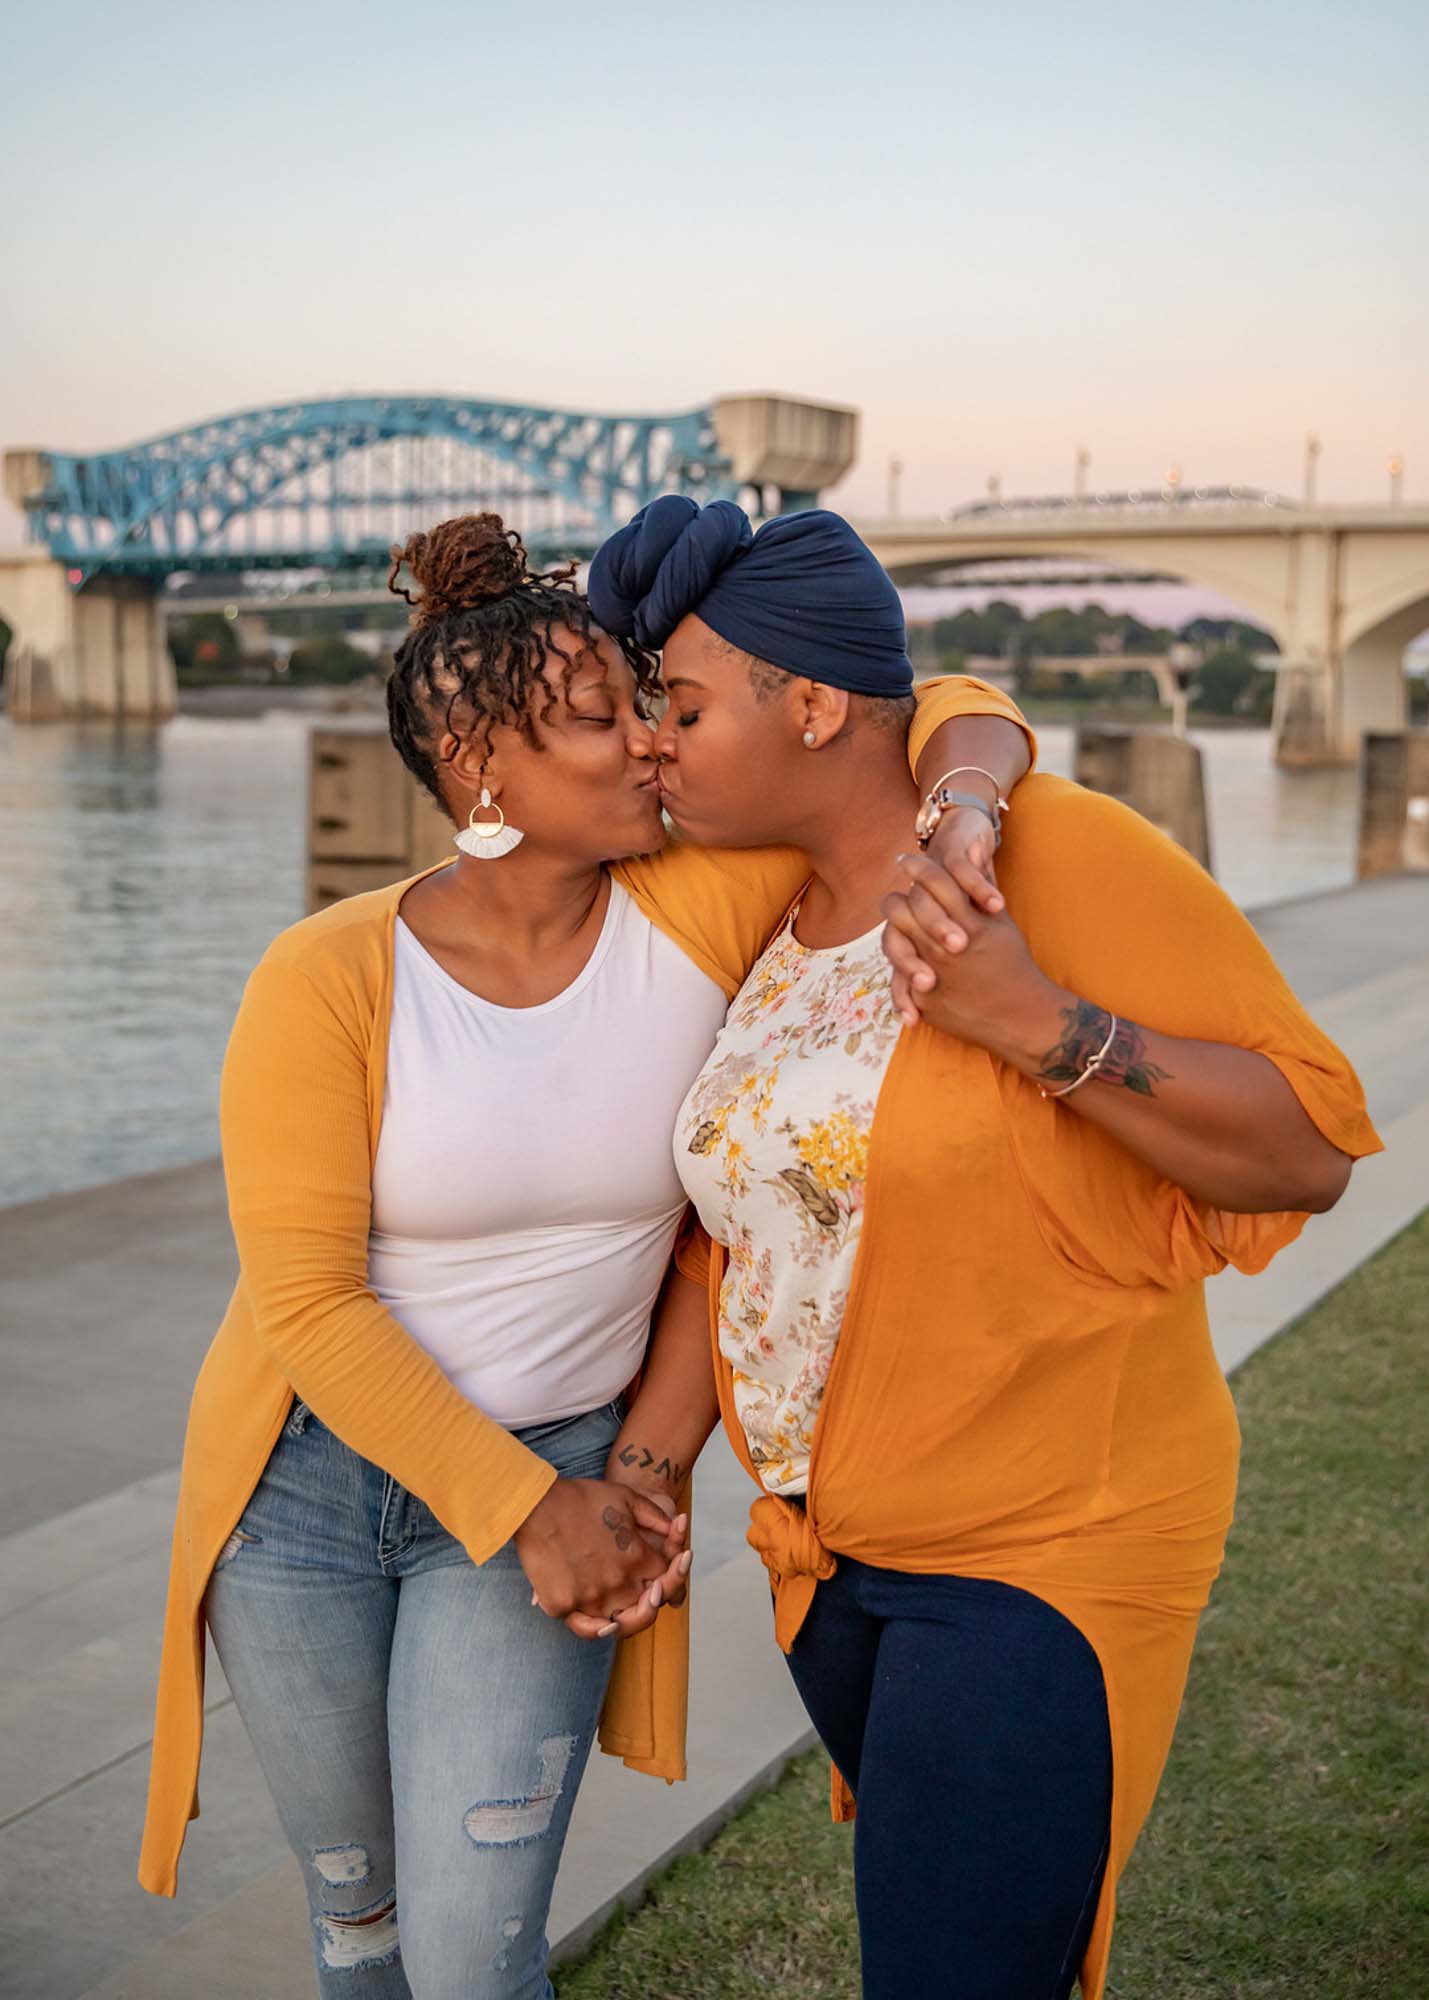 Laughter-filled sunset engagement session on the Tennessee River | Joshua & Inez Photography | Featured on Equally Wed, the leading LGBTQ+ wedding magazine